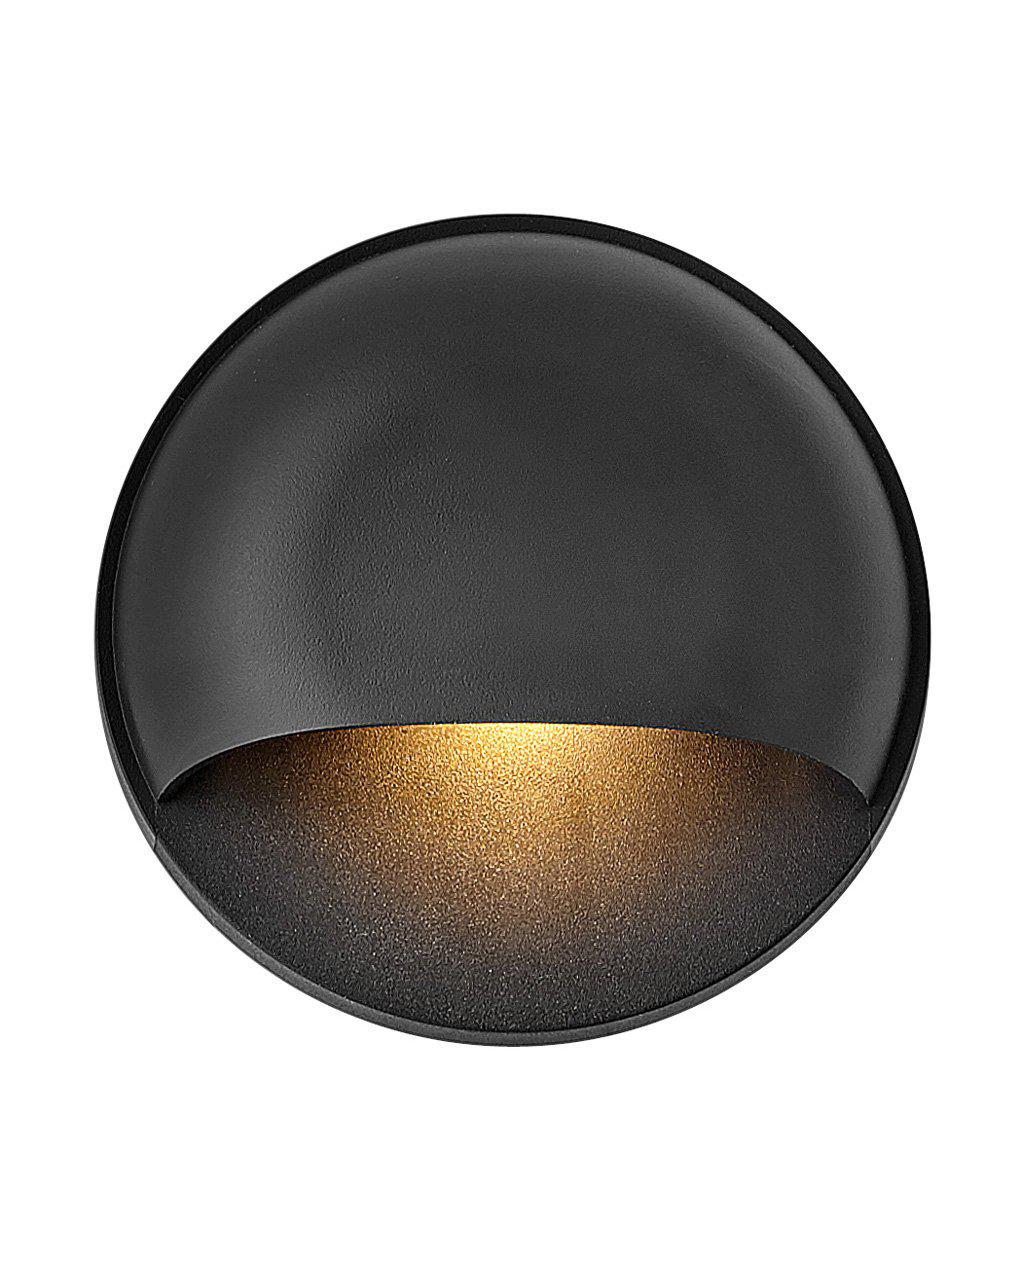 Hinkley  Nuvi Round Deck Sconce Outdoor Light Fixture Hinkley   